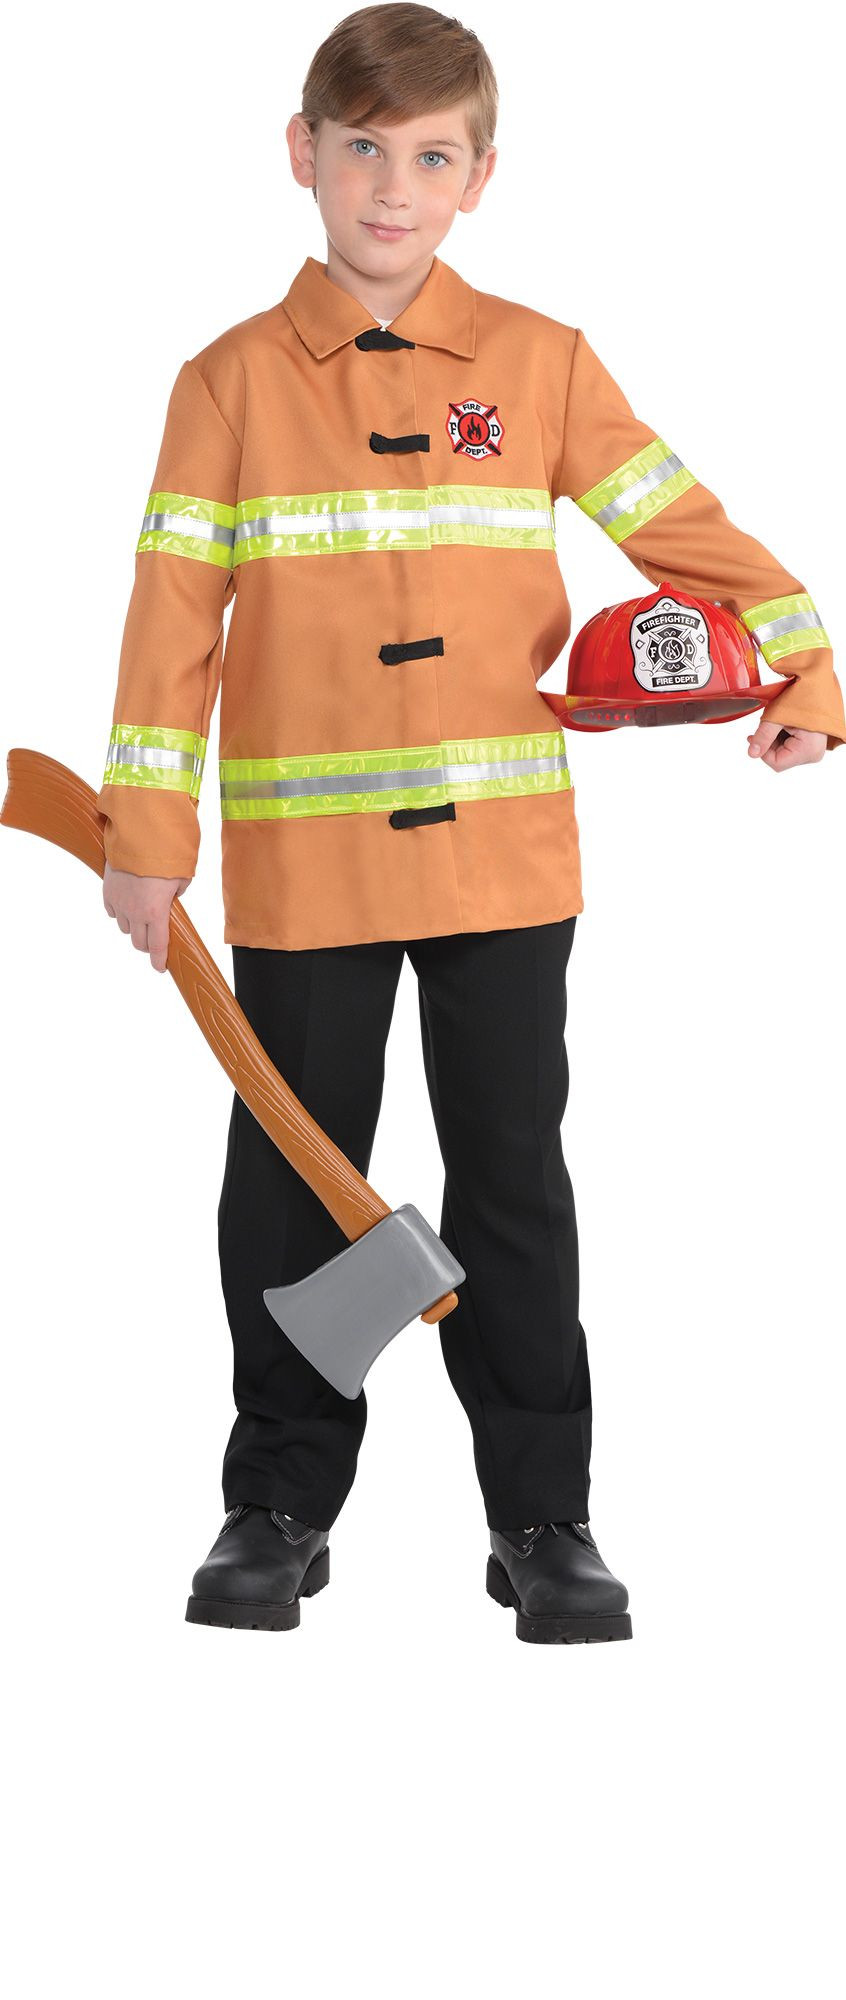 Party City Costumes Kids Boys
 Boys Firefighter Costume Accessories Party City